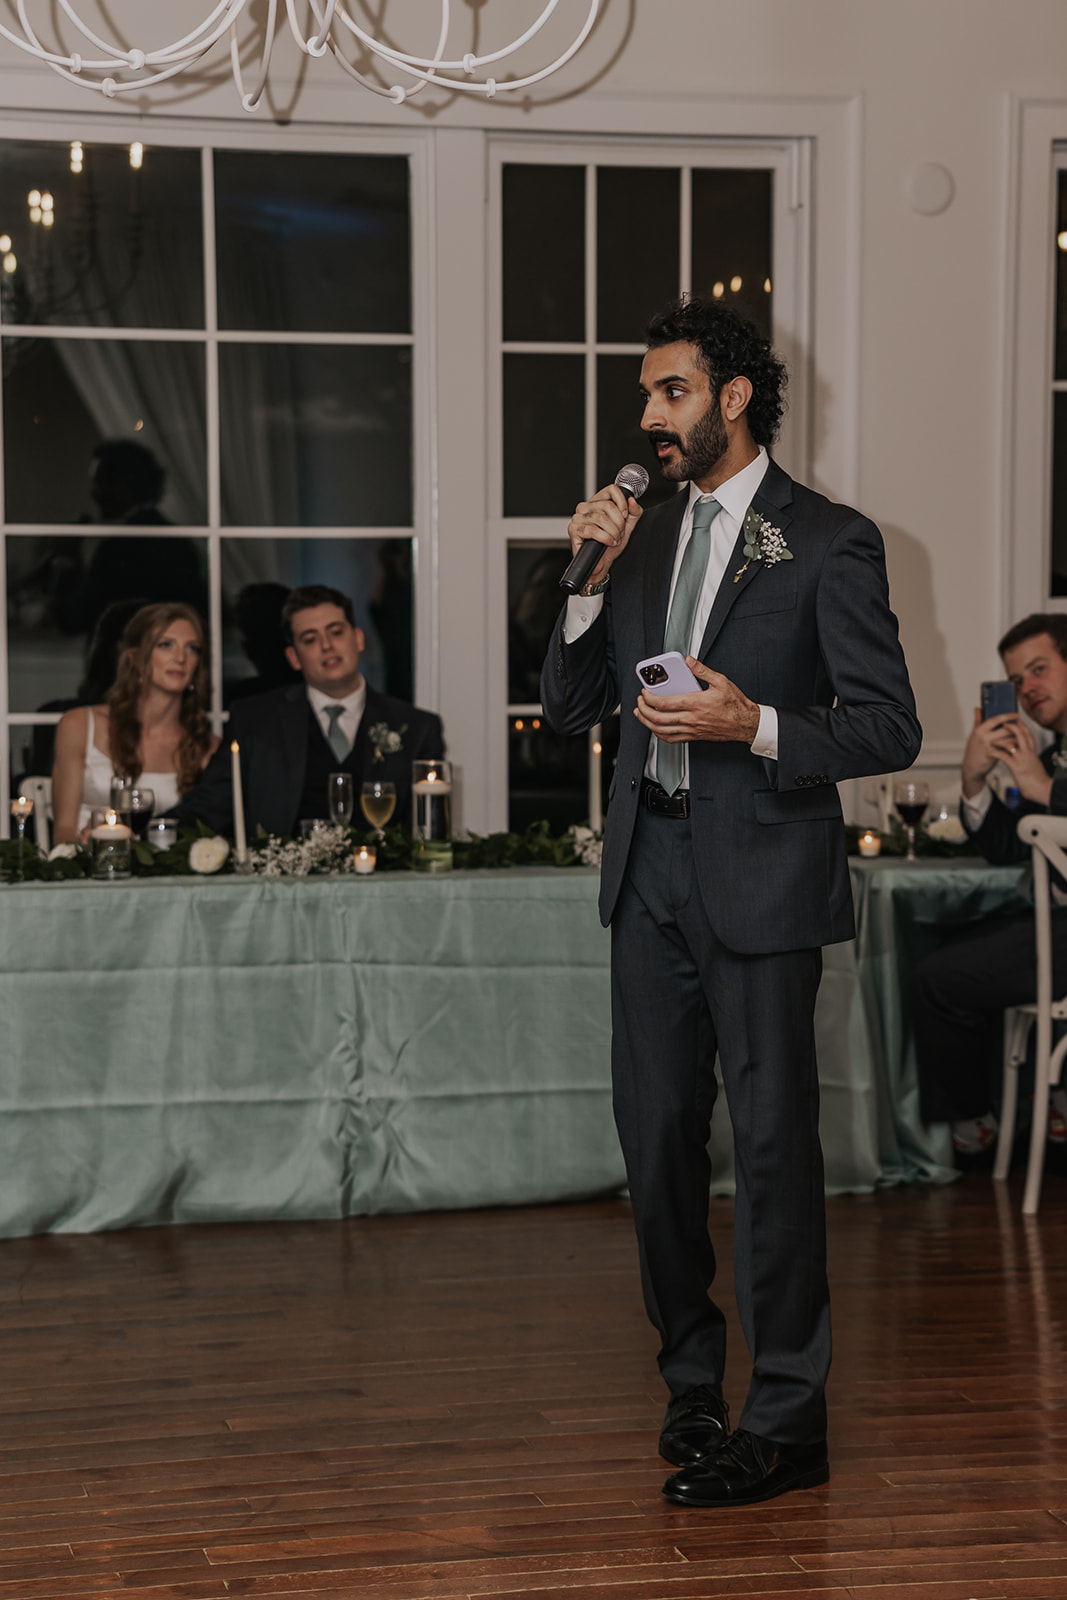 Groomsmen gives toast during the dreamy Georgia wedding reception